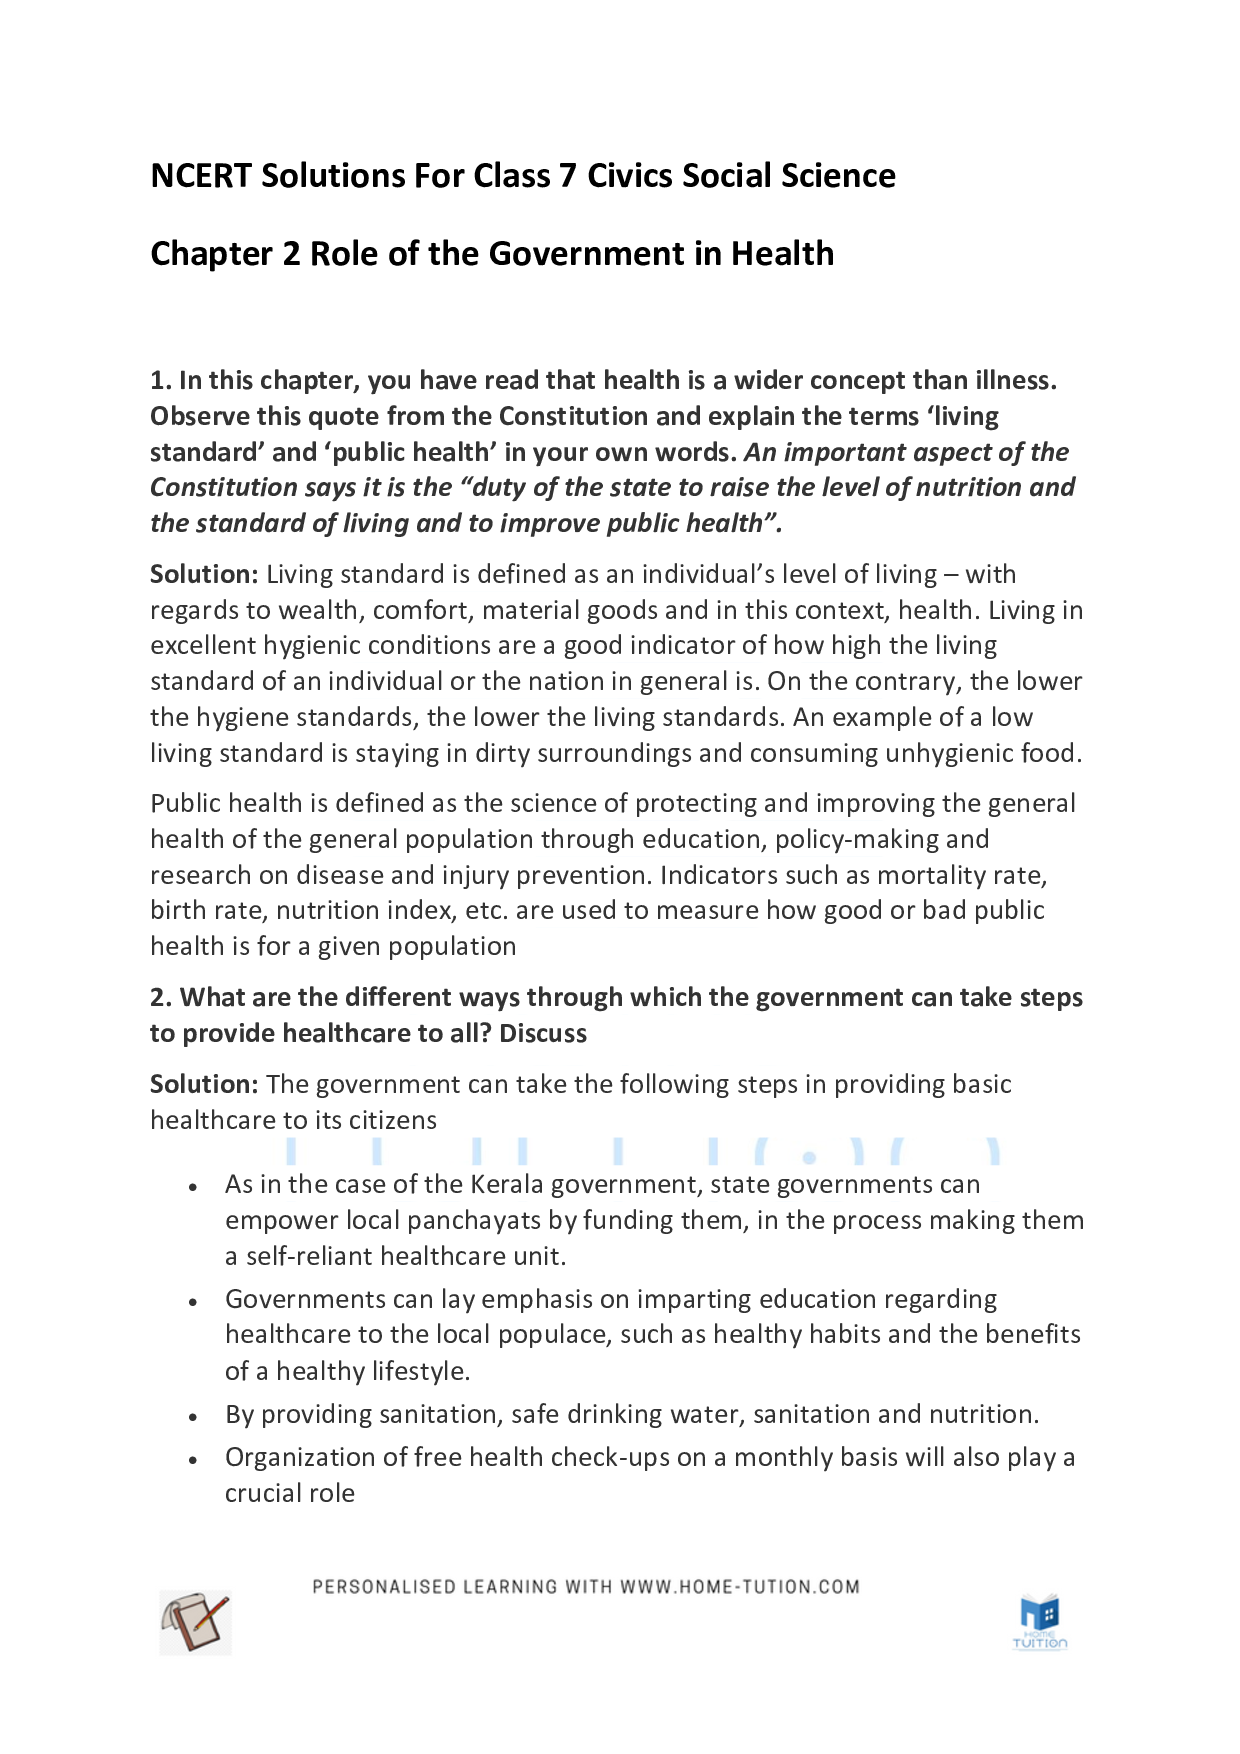 Chapter 2 Role of the Government in Health